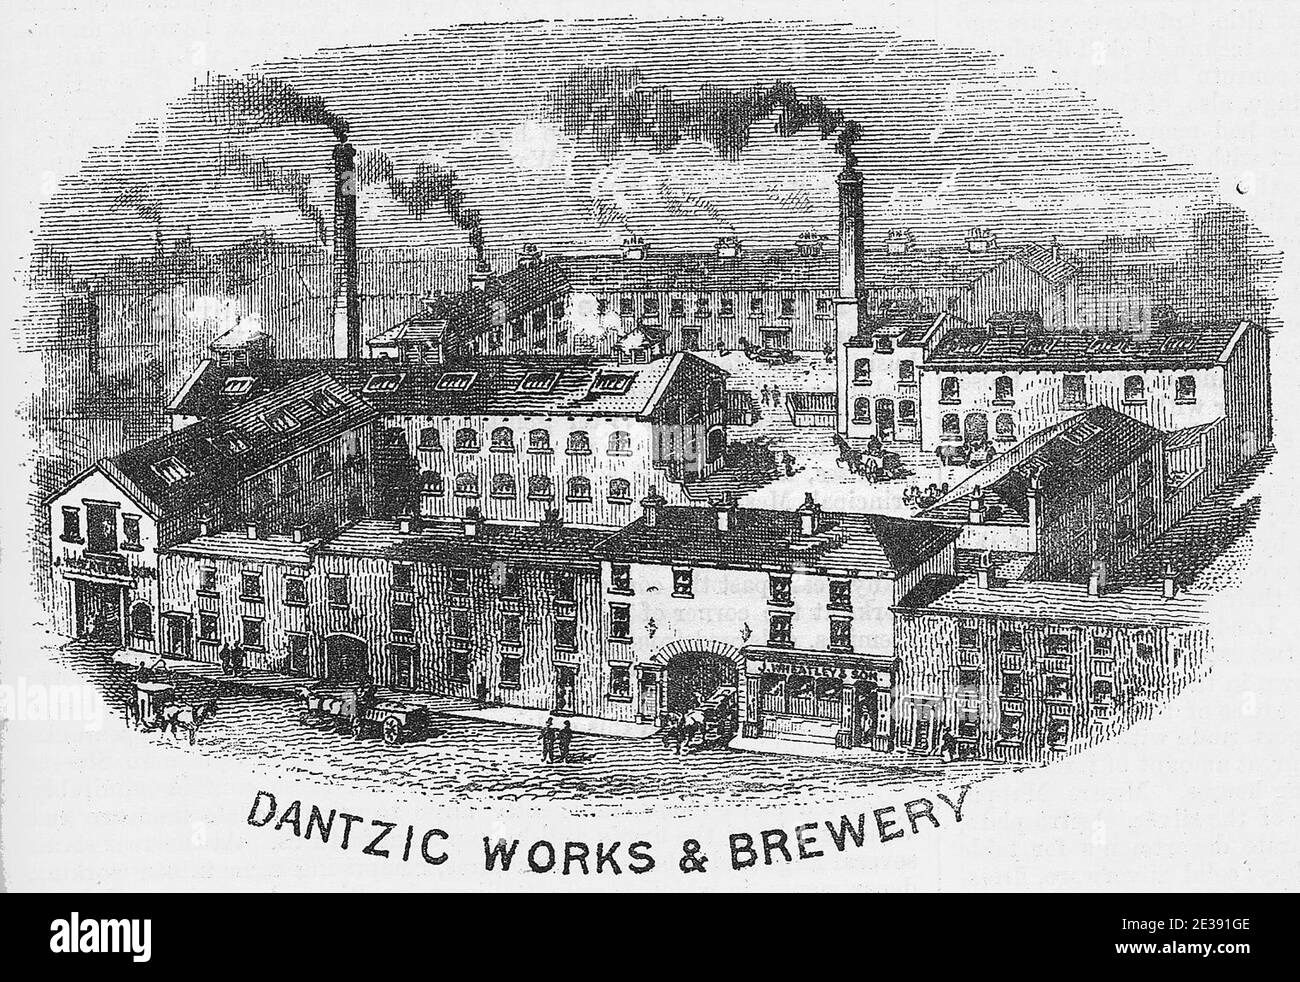 J. Wheatley and Son, wine and brandy shippers, Dantzic Works and Brewery, Napier Street, Sharrow, Sheffield, Yorkshire, UK  An etching, engraving or lithograph from the Victorian Era. Stock Photo